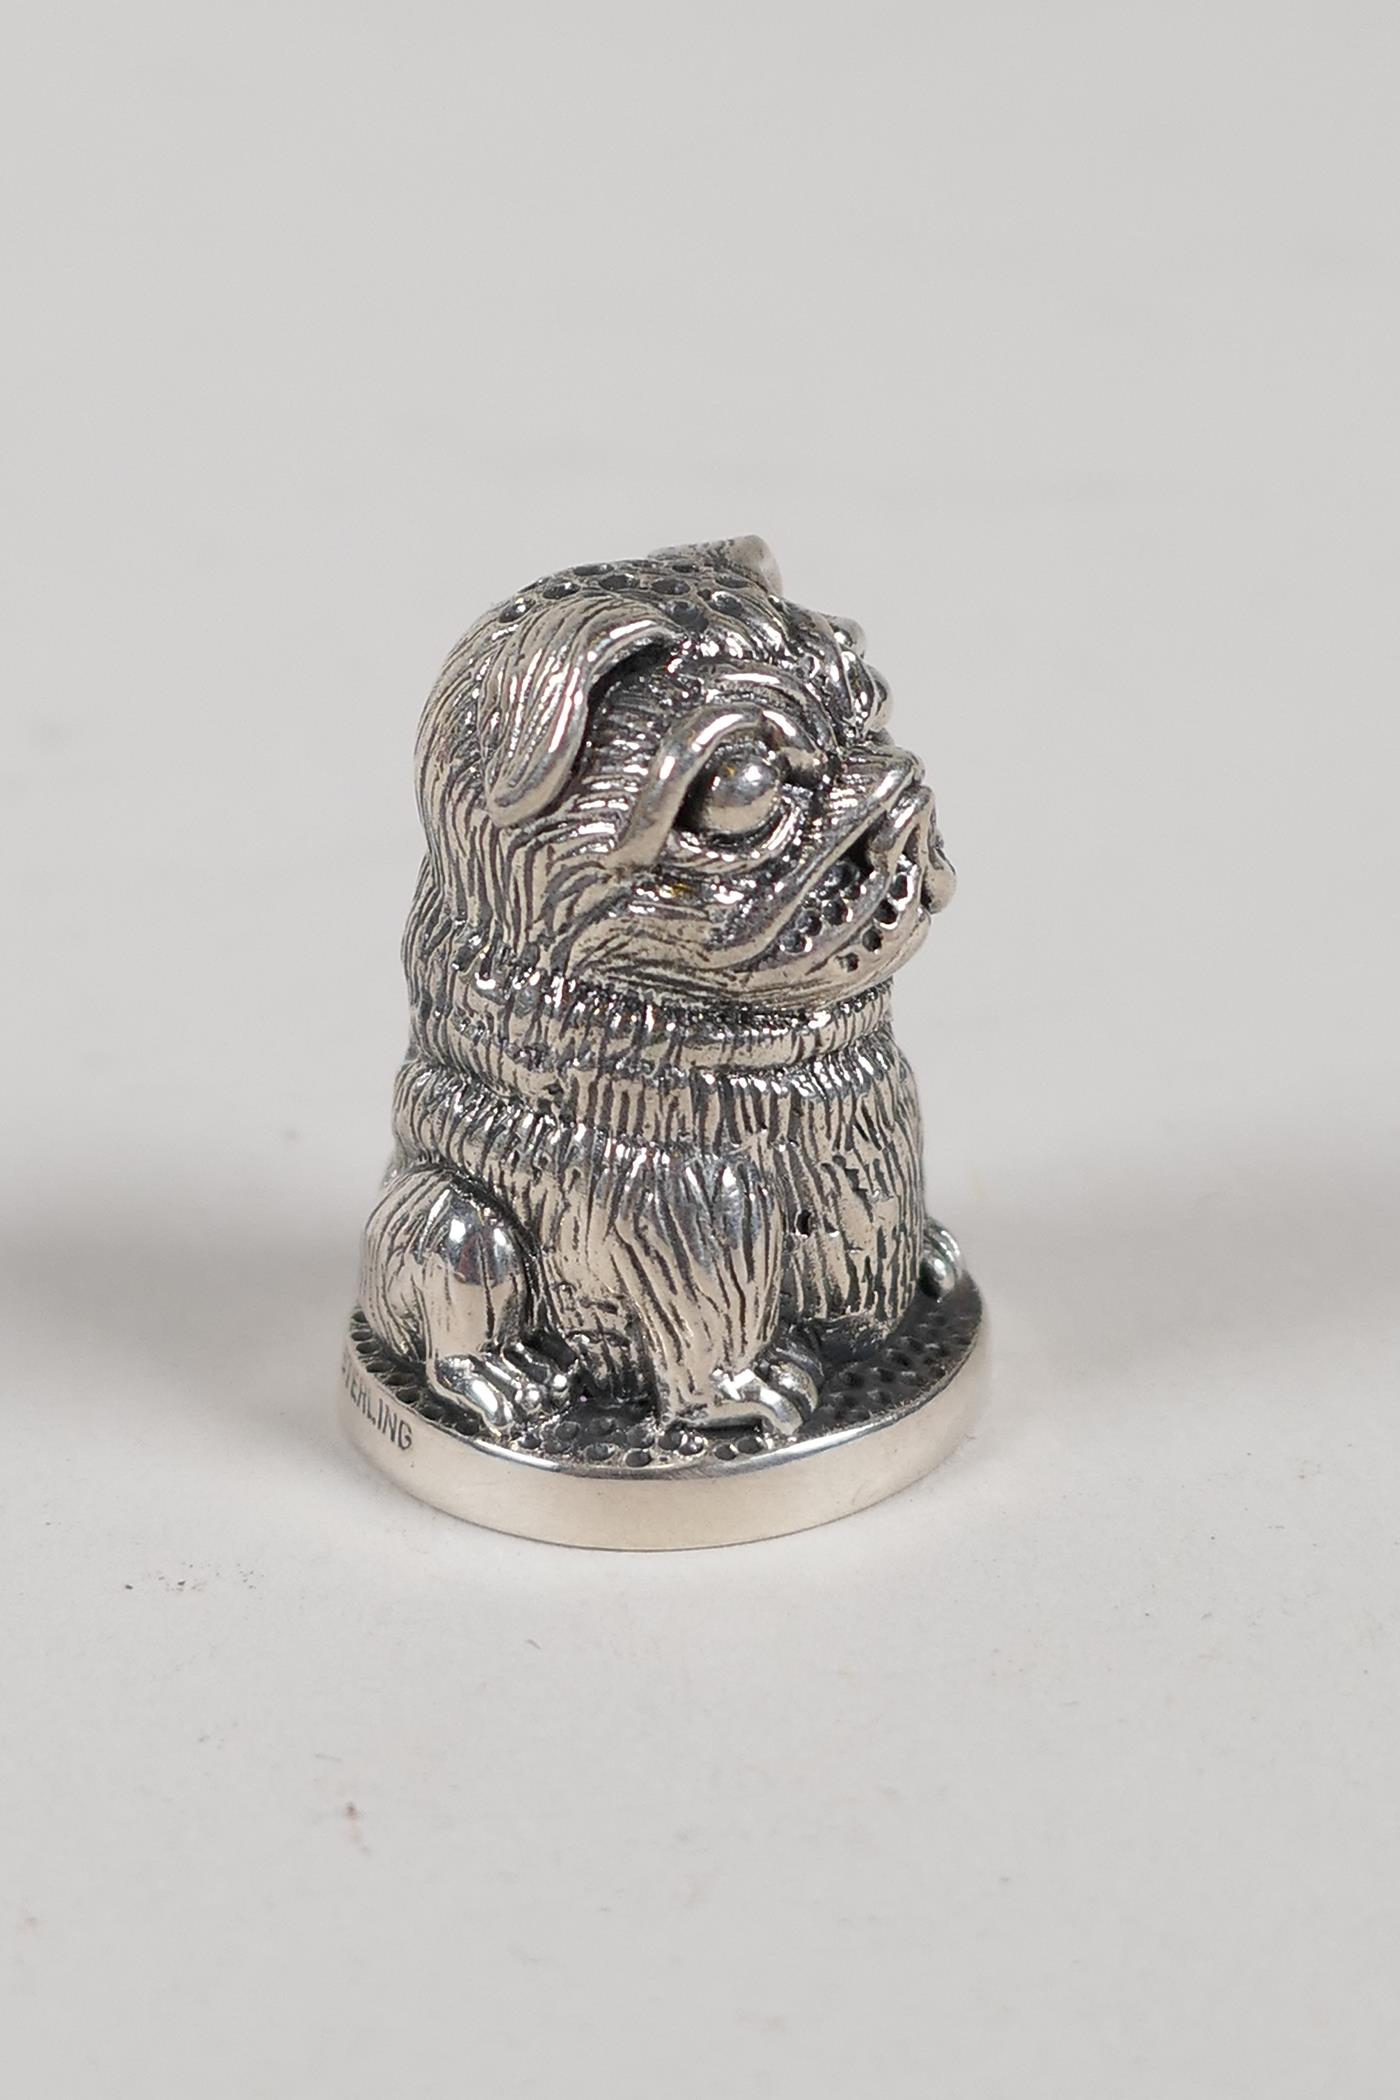 A sterling silver thimble in the form of a pug dog, 1" high - Image 2 of 3